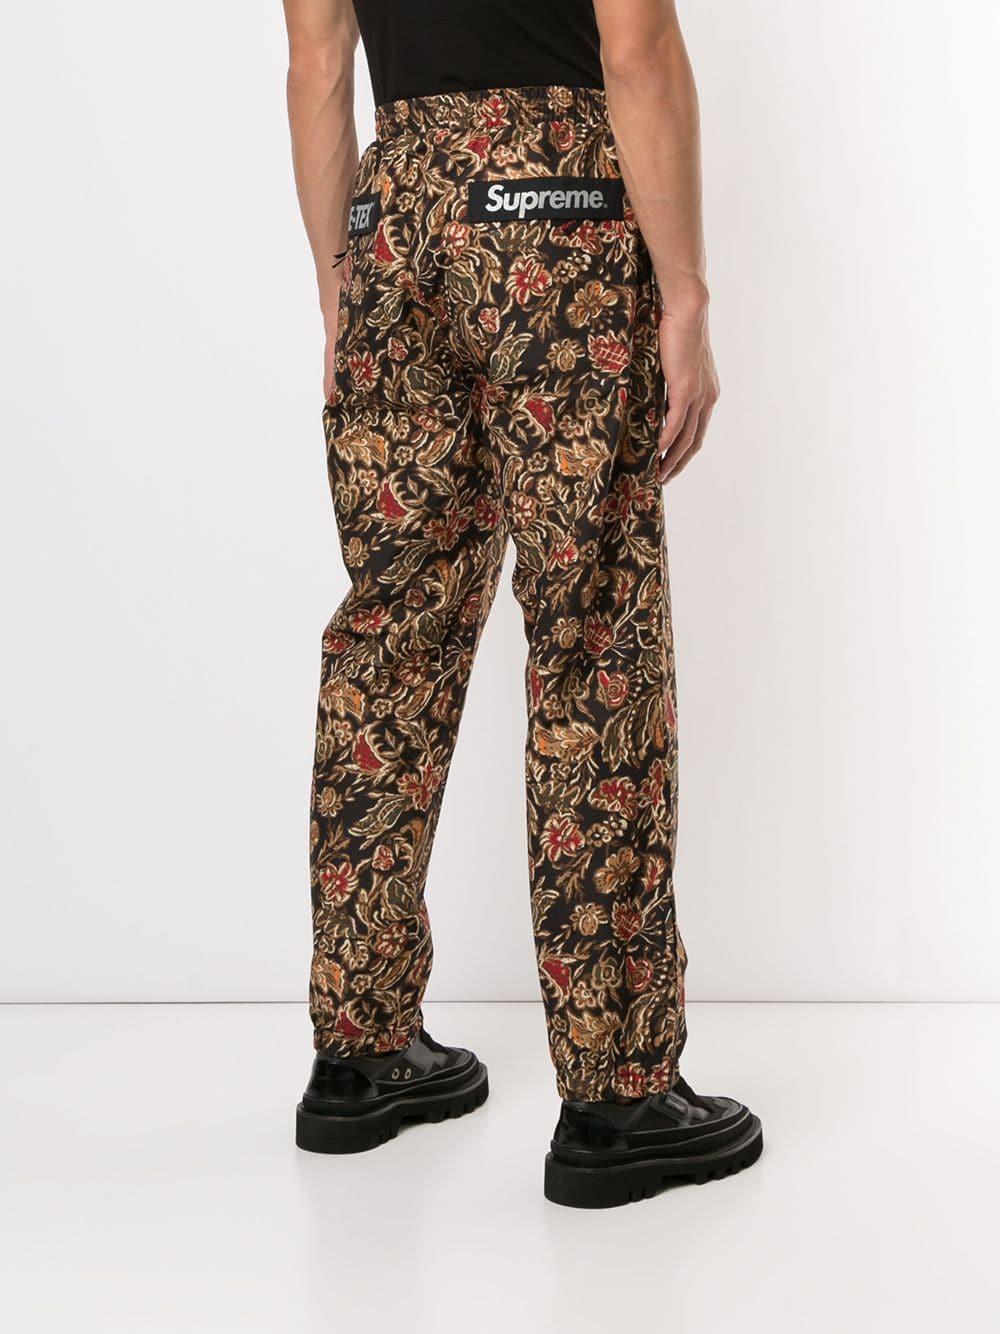 Supreme Synthetic Gore Tex Floral Trousers for Men - Lyst